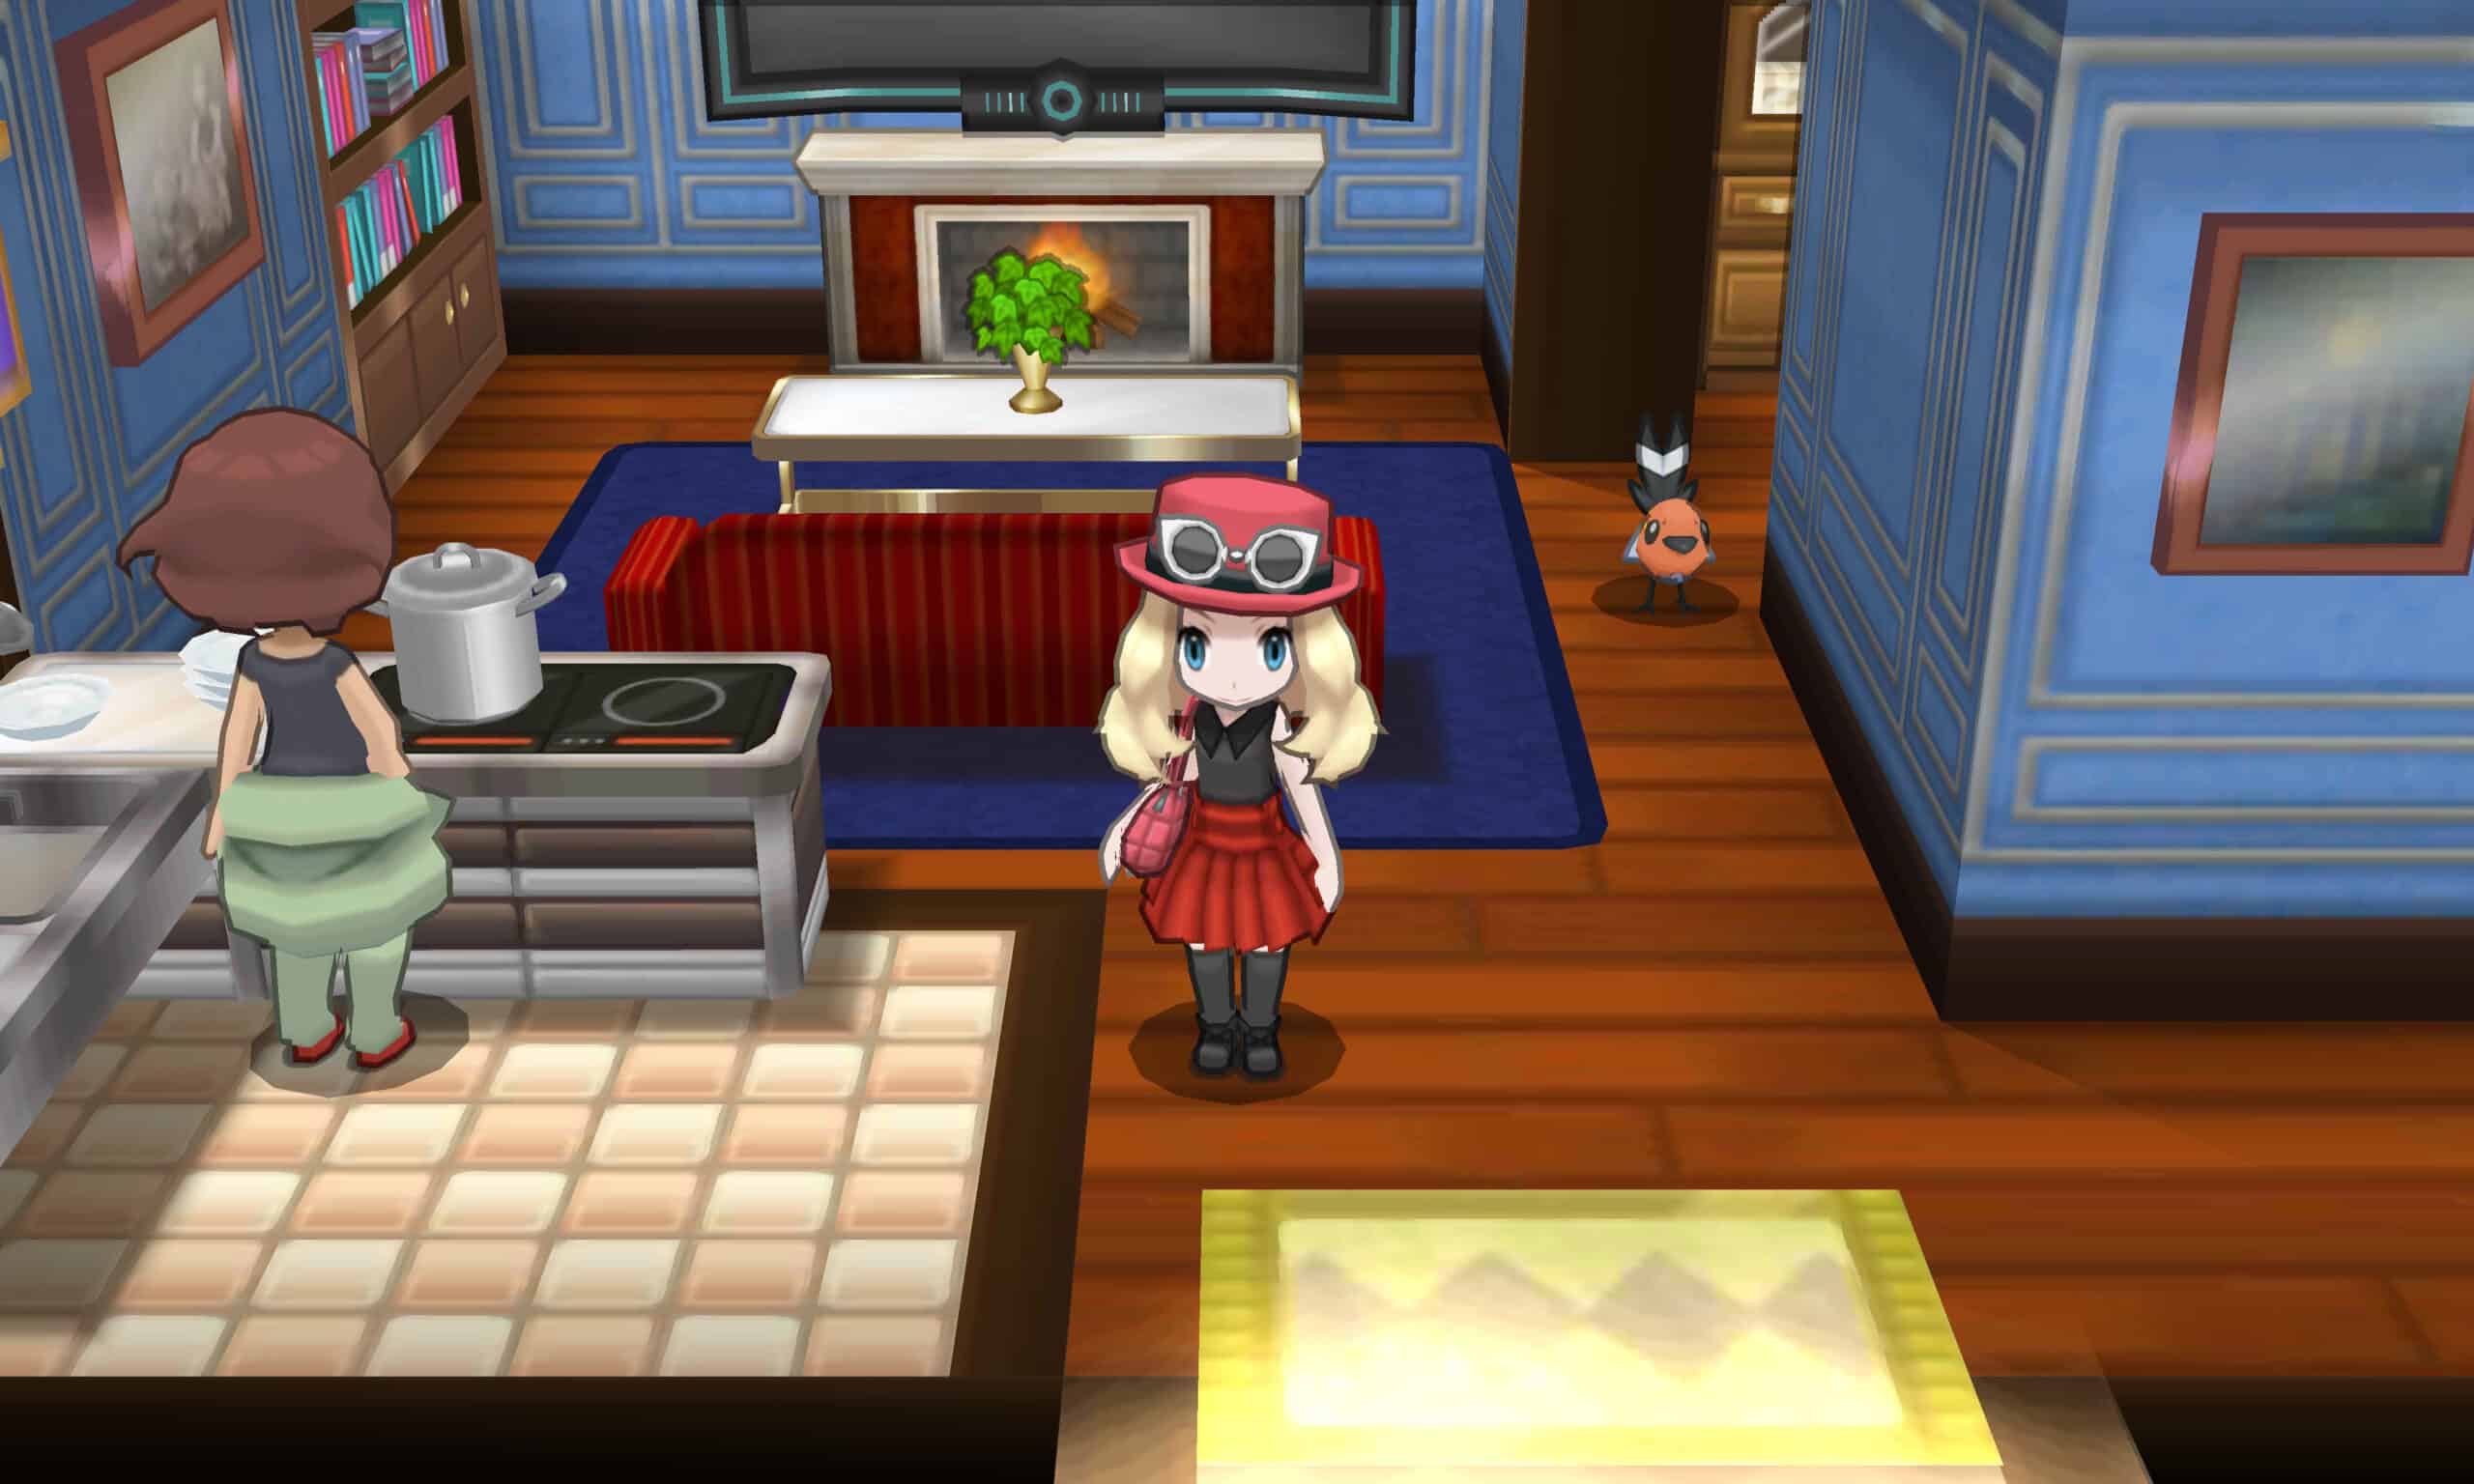 An in-game screenshot from Pokemon X.